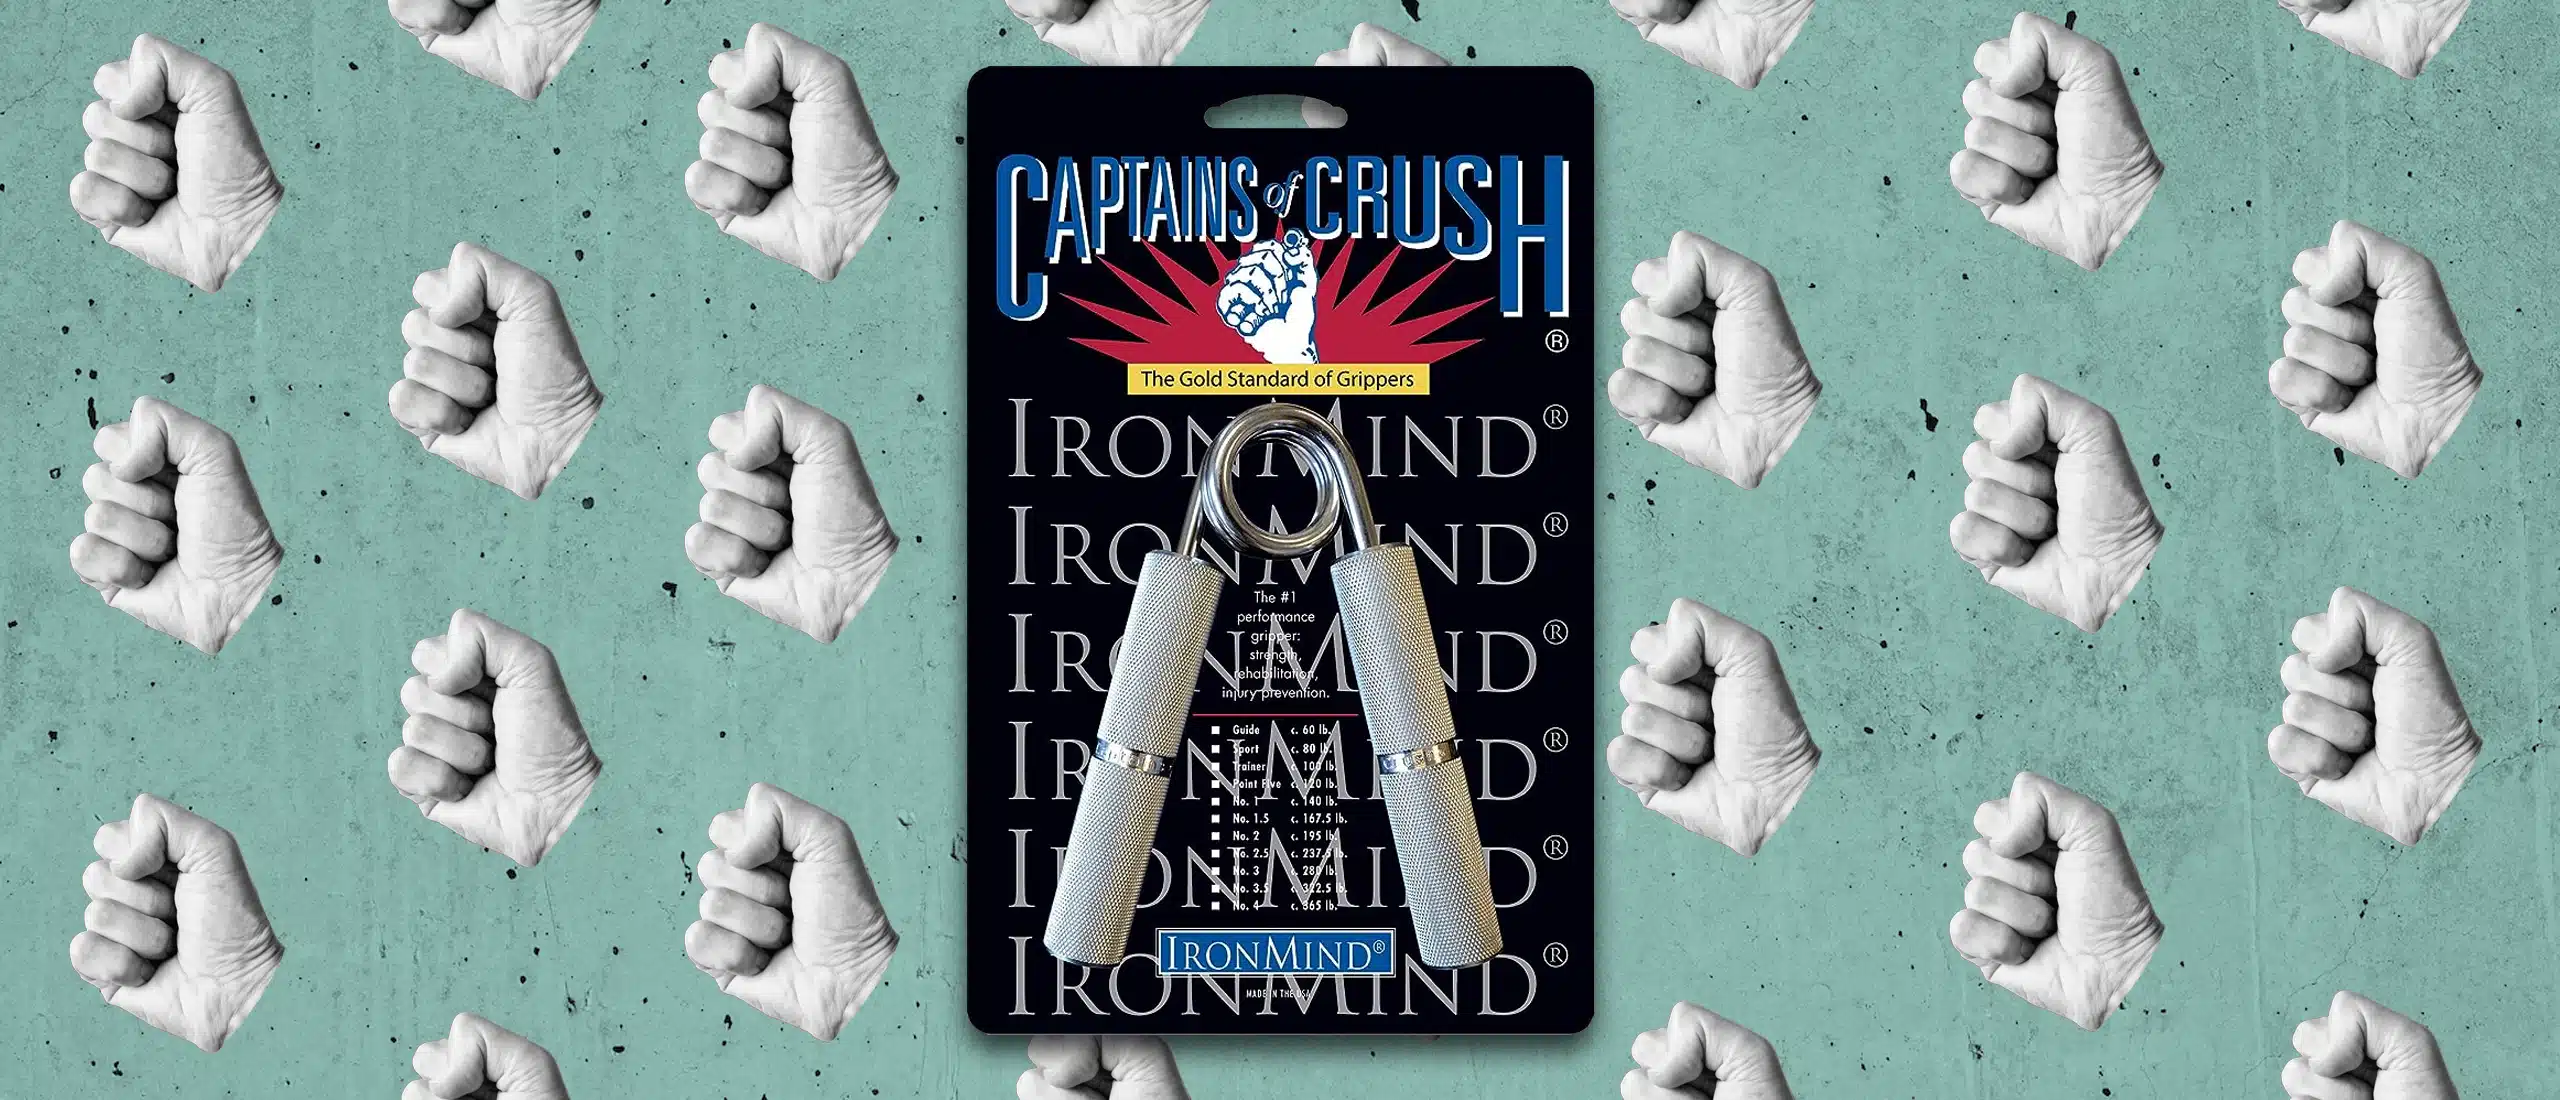 Captains of Crush Grippers - Grip Strength Training